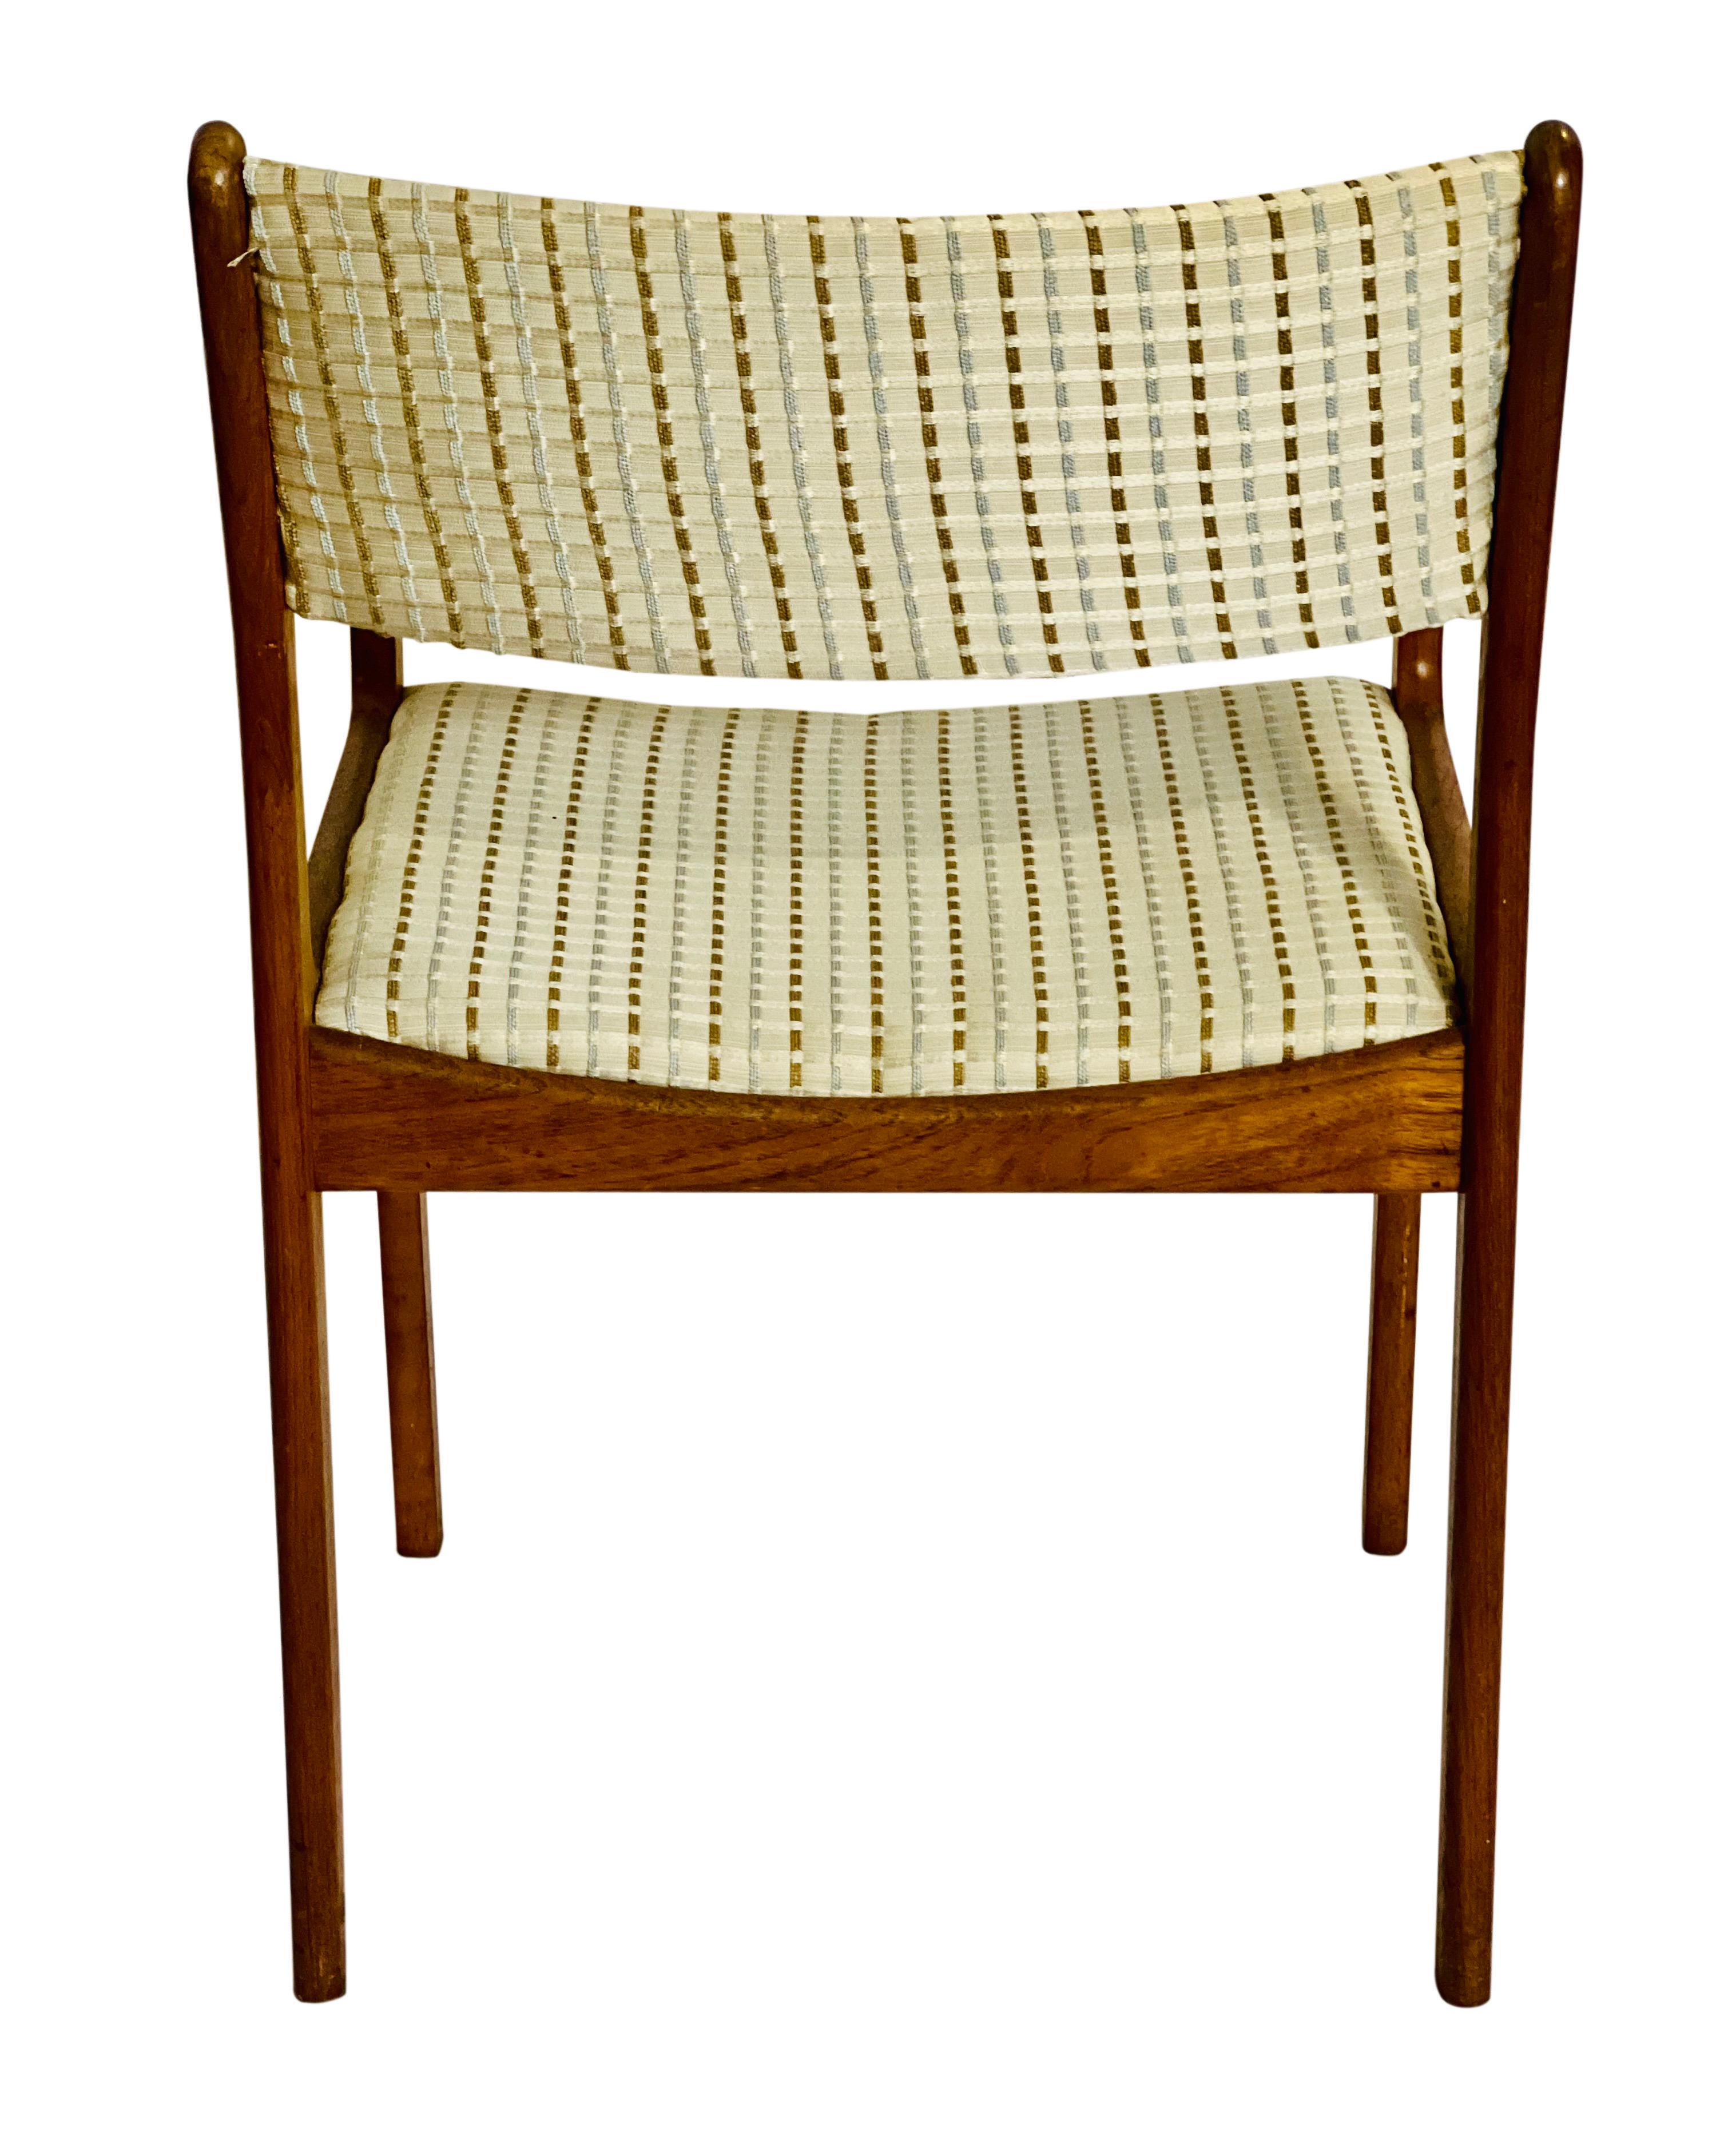 Midcentury Danish Teak Dining Chairs, Set of Four For Sale 2